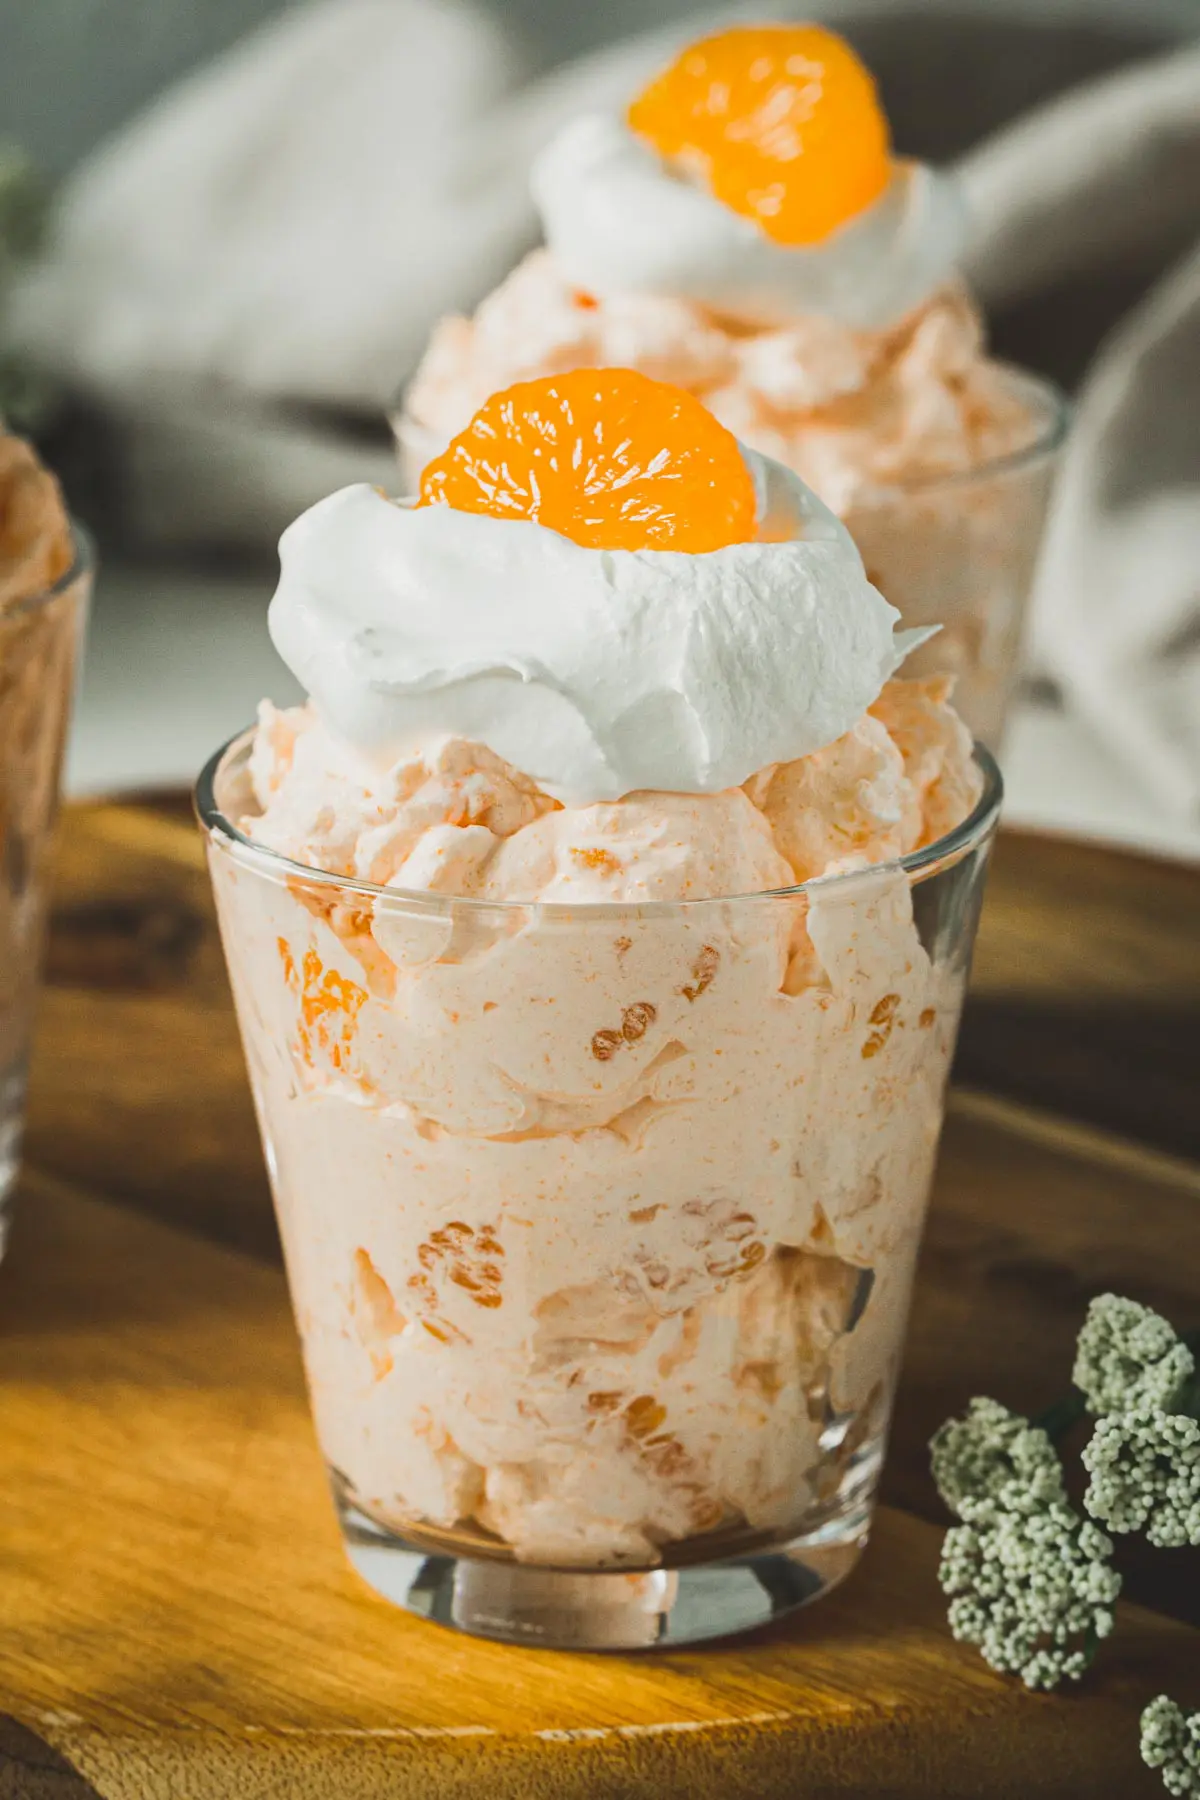 Orange jello salad in a glass jar topped with whipped cream and an orange wedge.